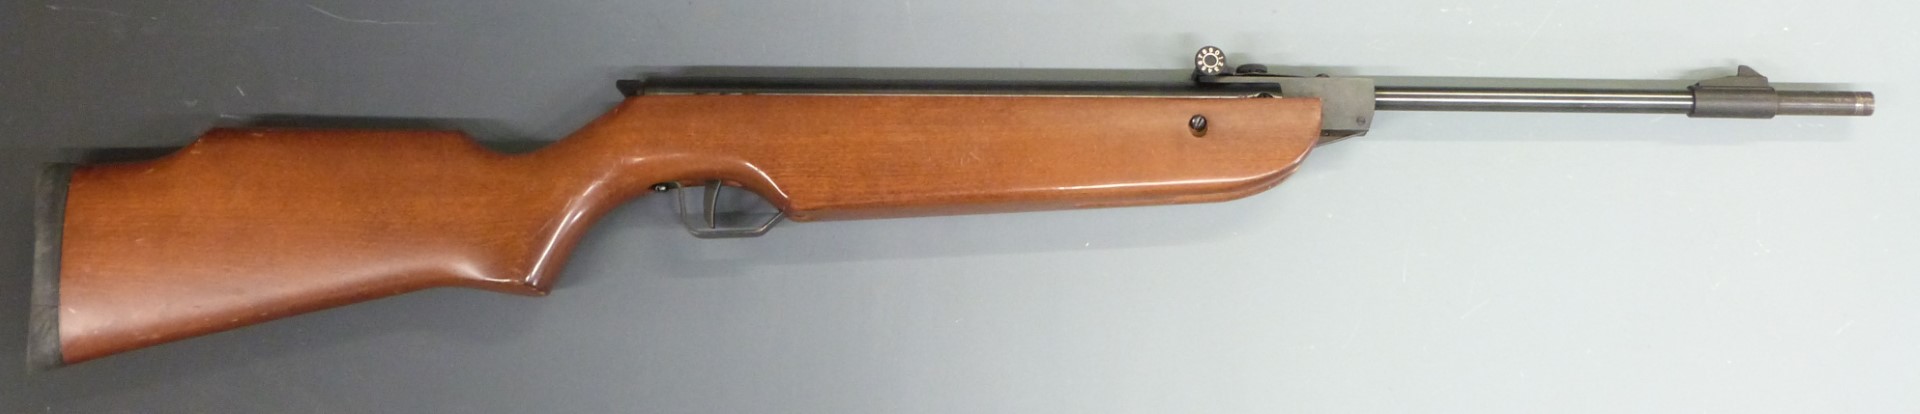 Cometa 300-S .22 air rifle with raised cheek piece and adjustable sights, serial number 20643.